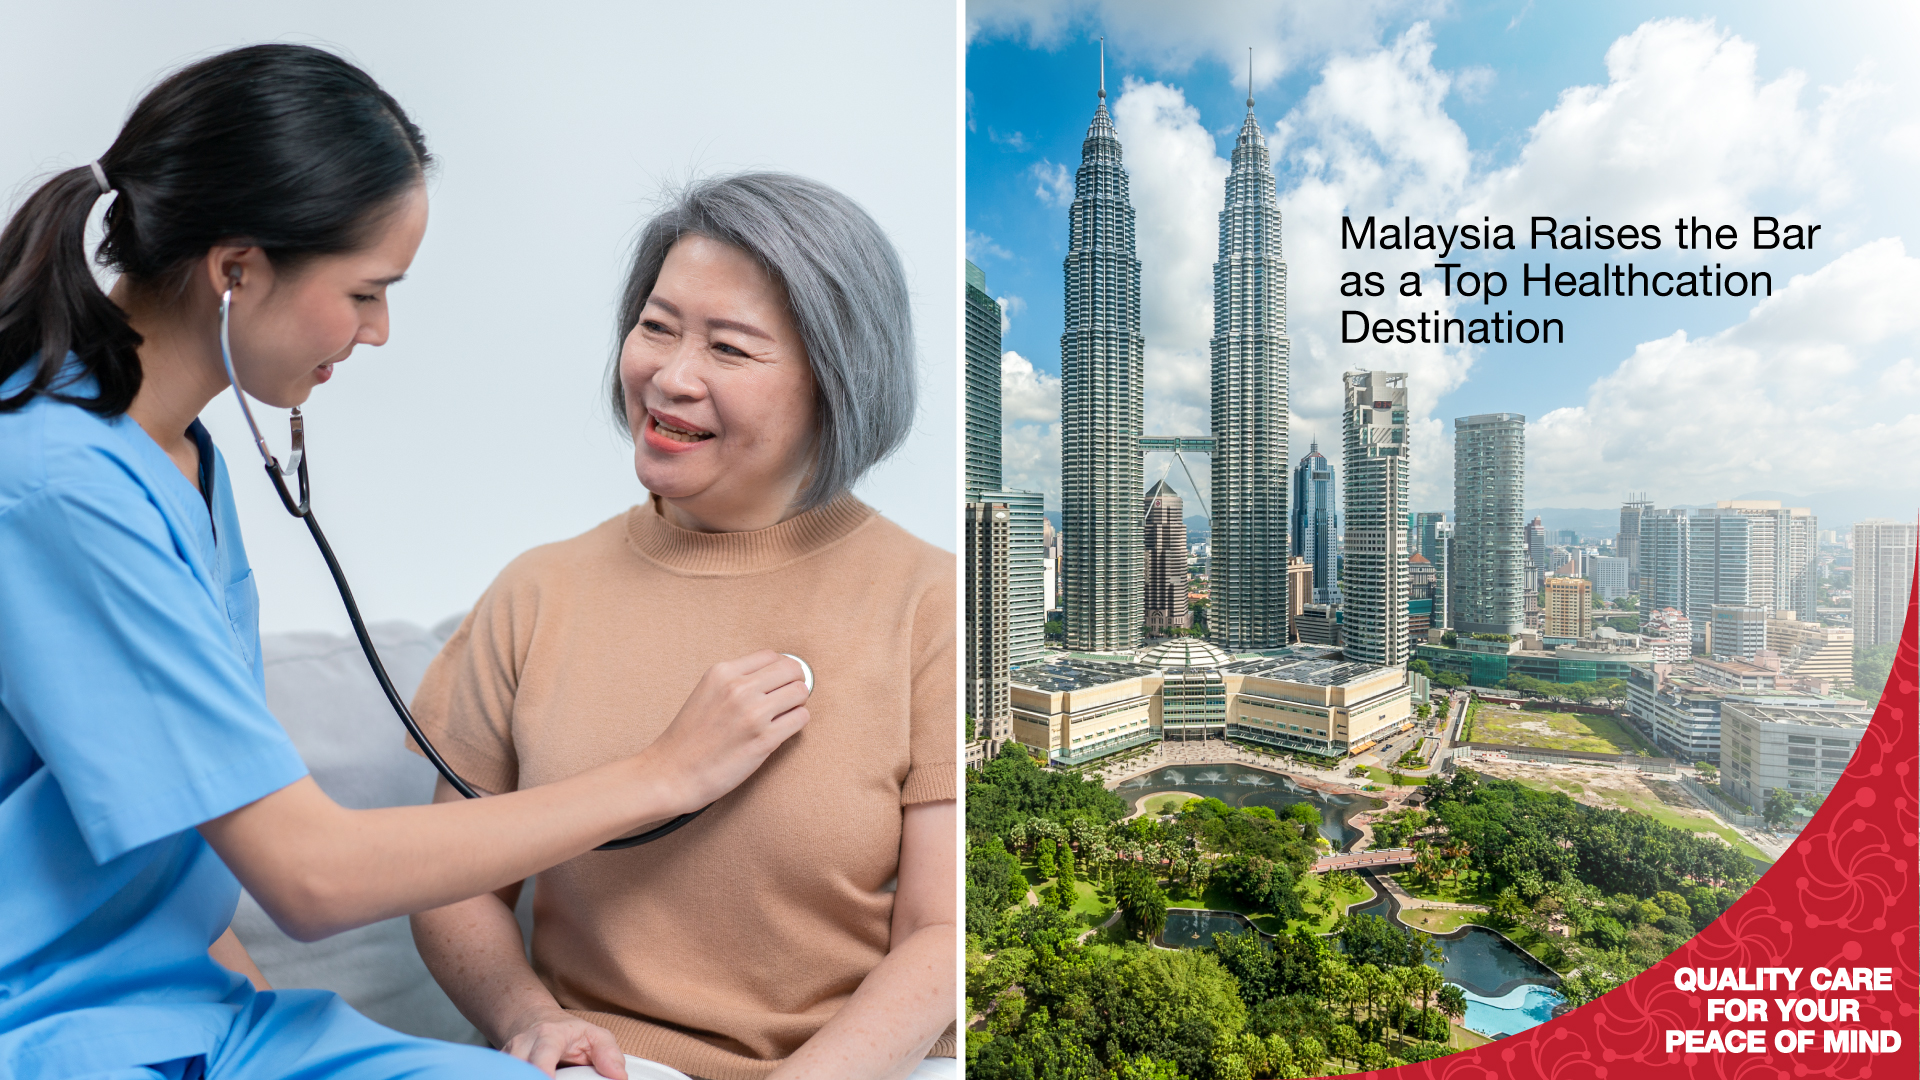 MHTC-Press-Release-Malaysia-Raises-the-Bar-as-a-Top-Destination-for-Holidays-and-Health-Screening-3.jpeg